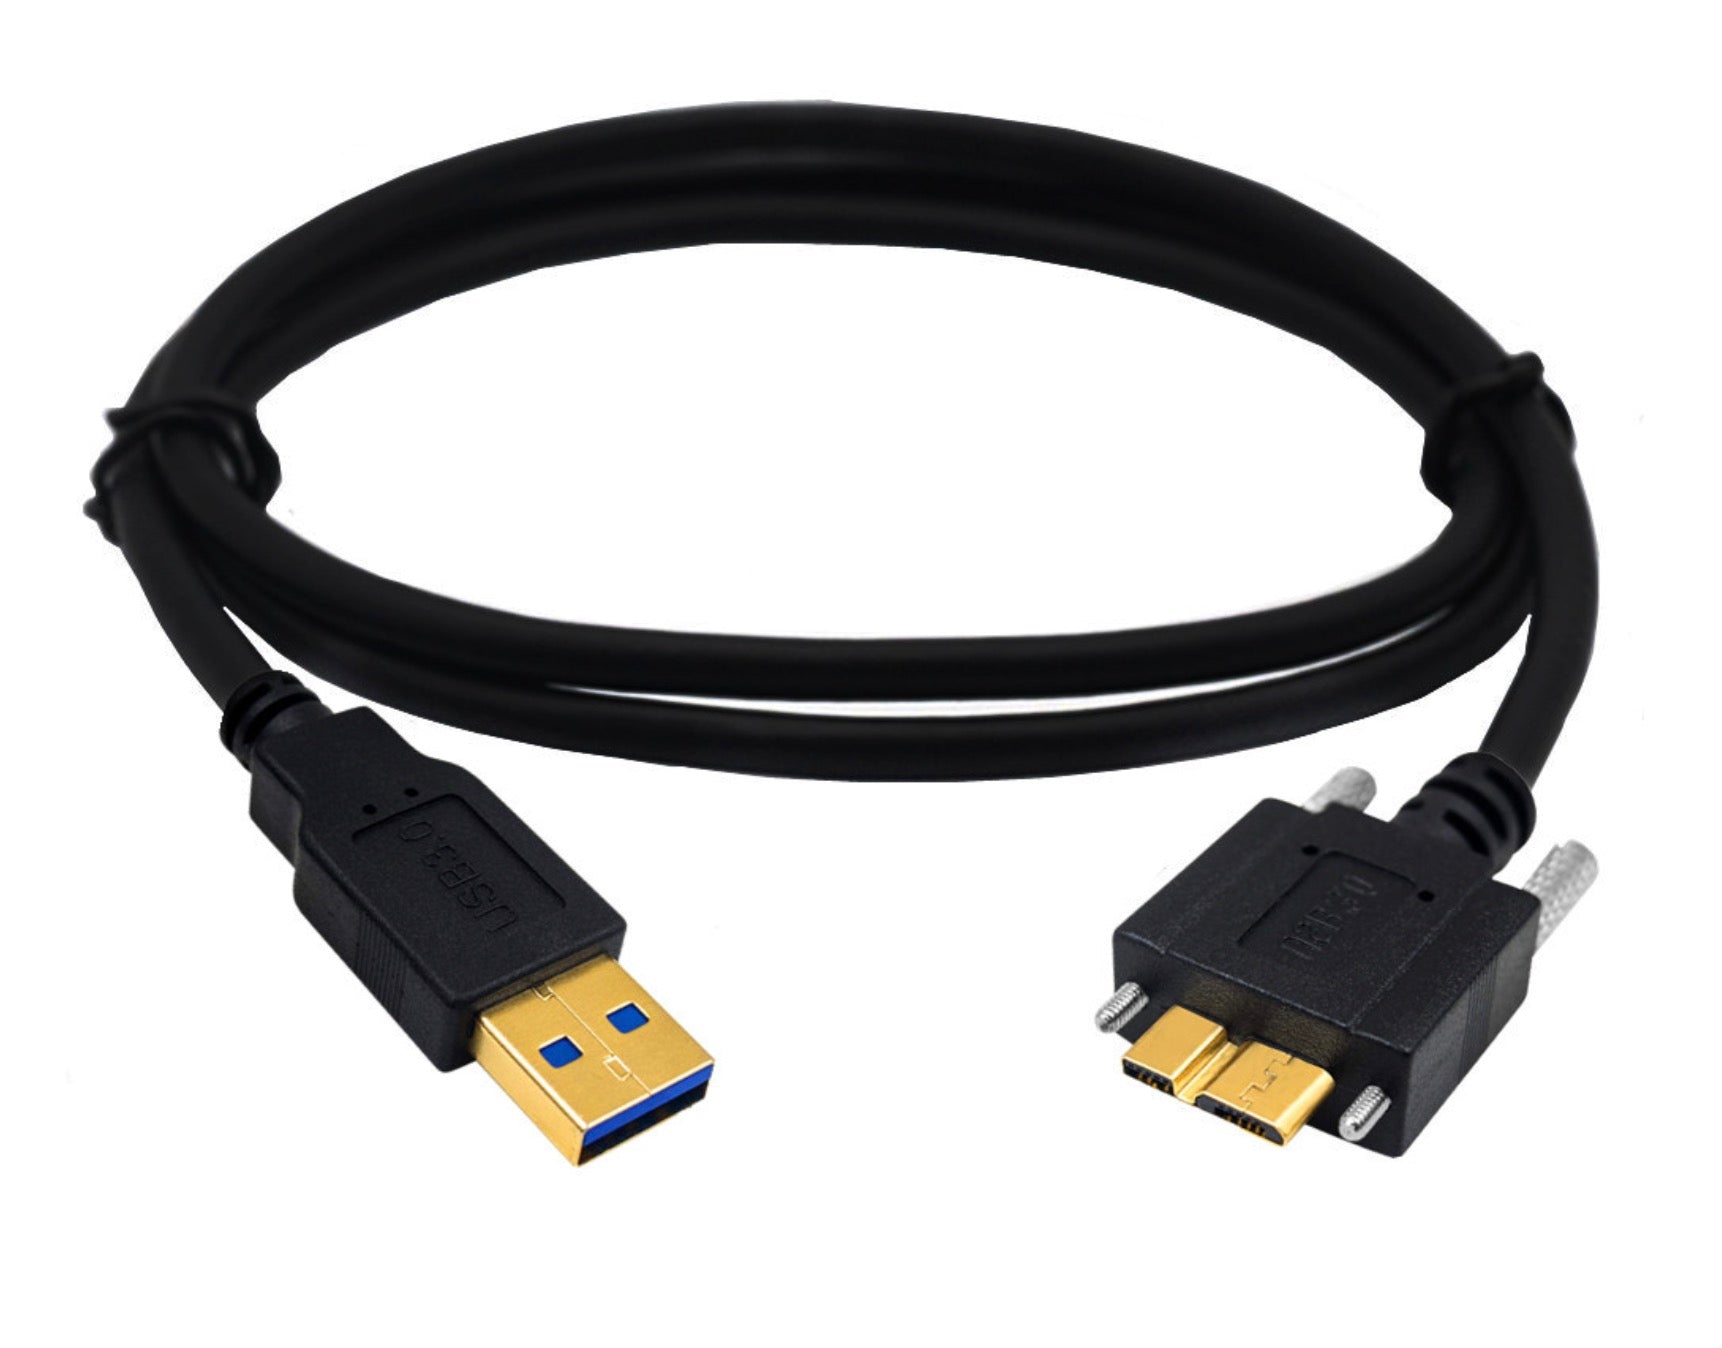 USB-A 3.0 Male to Micro-B Charge & Sync Cable with Locking Screws